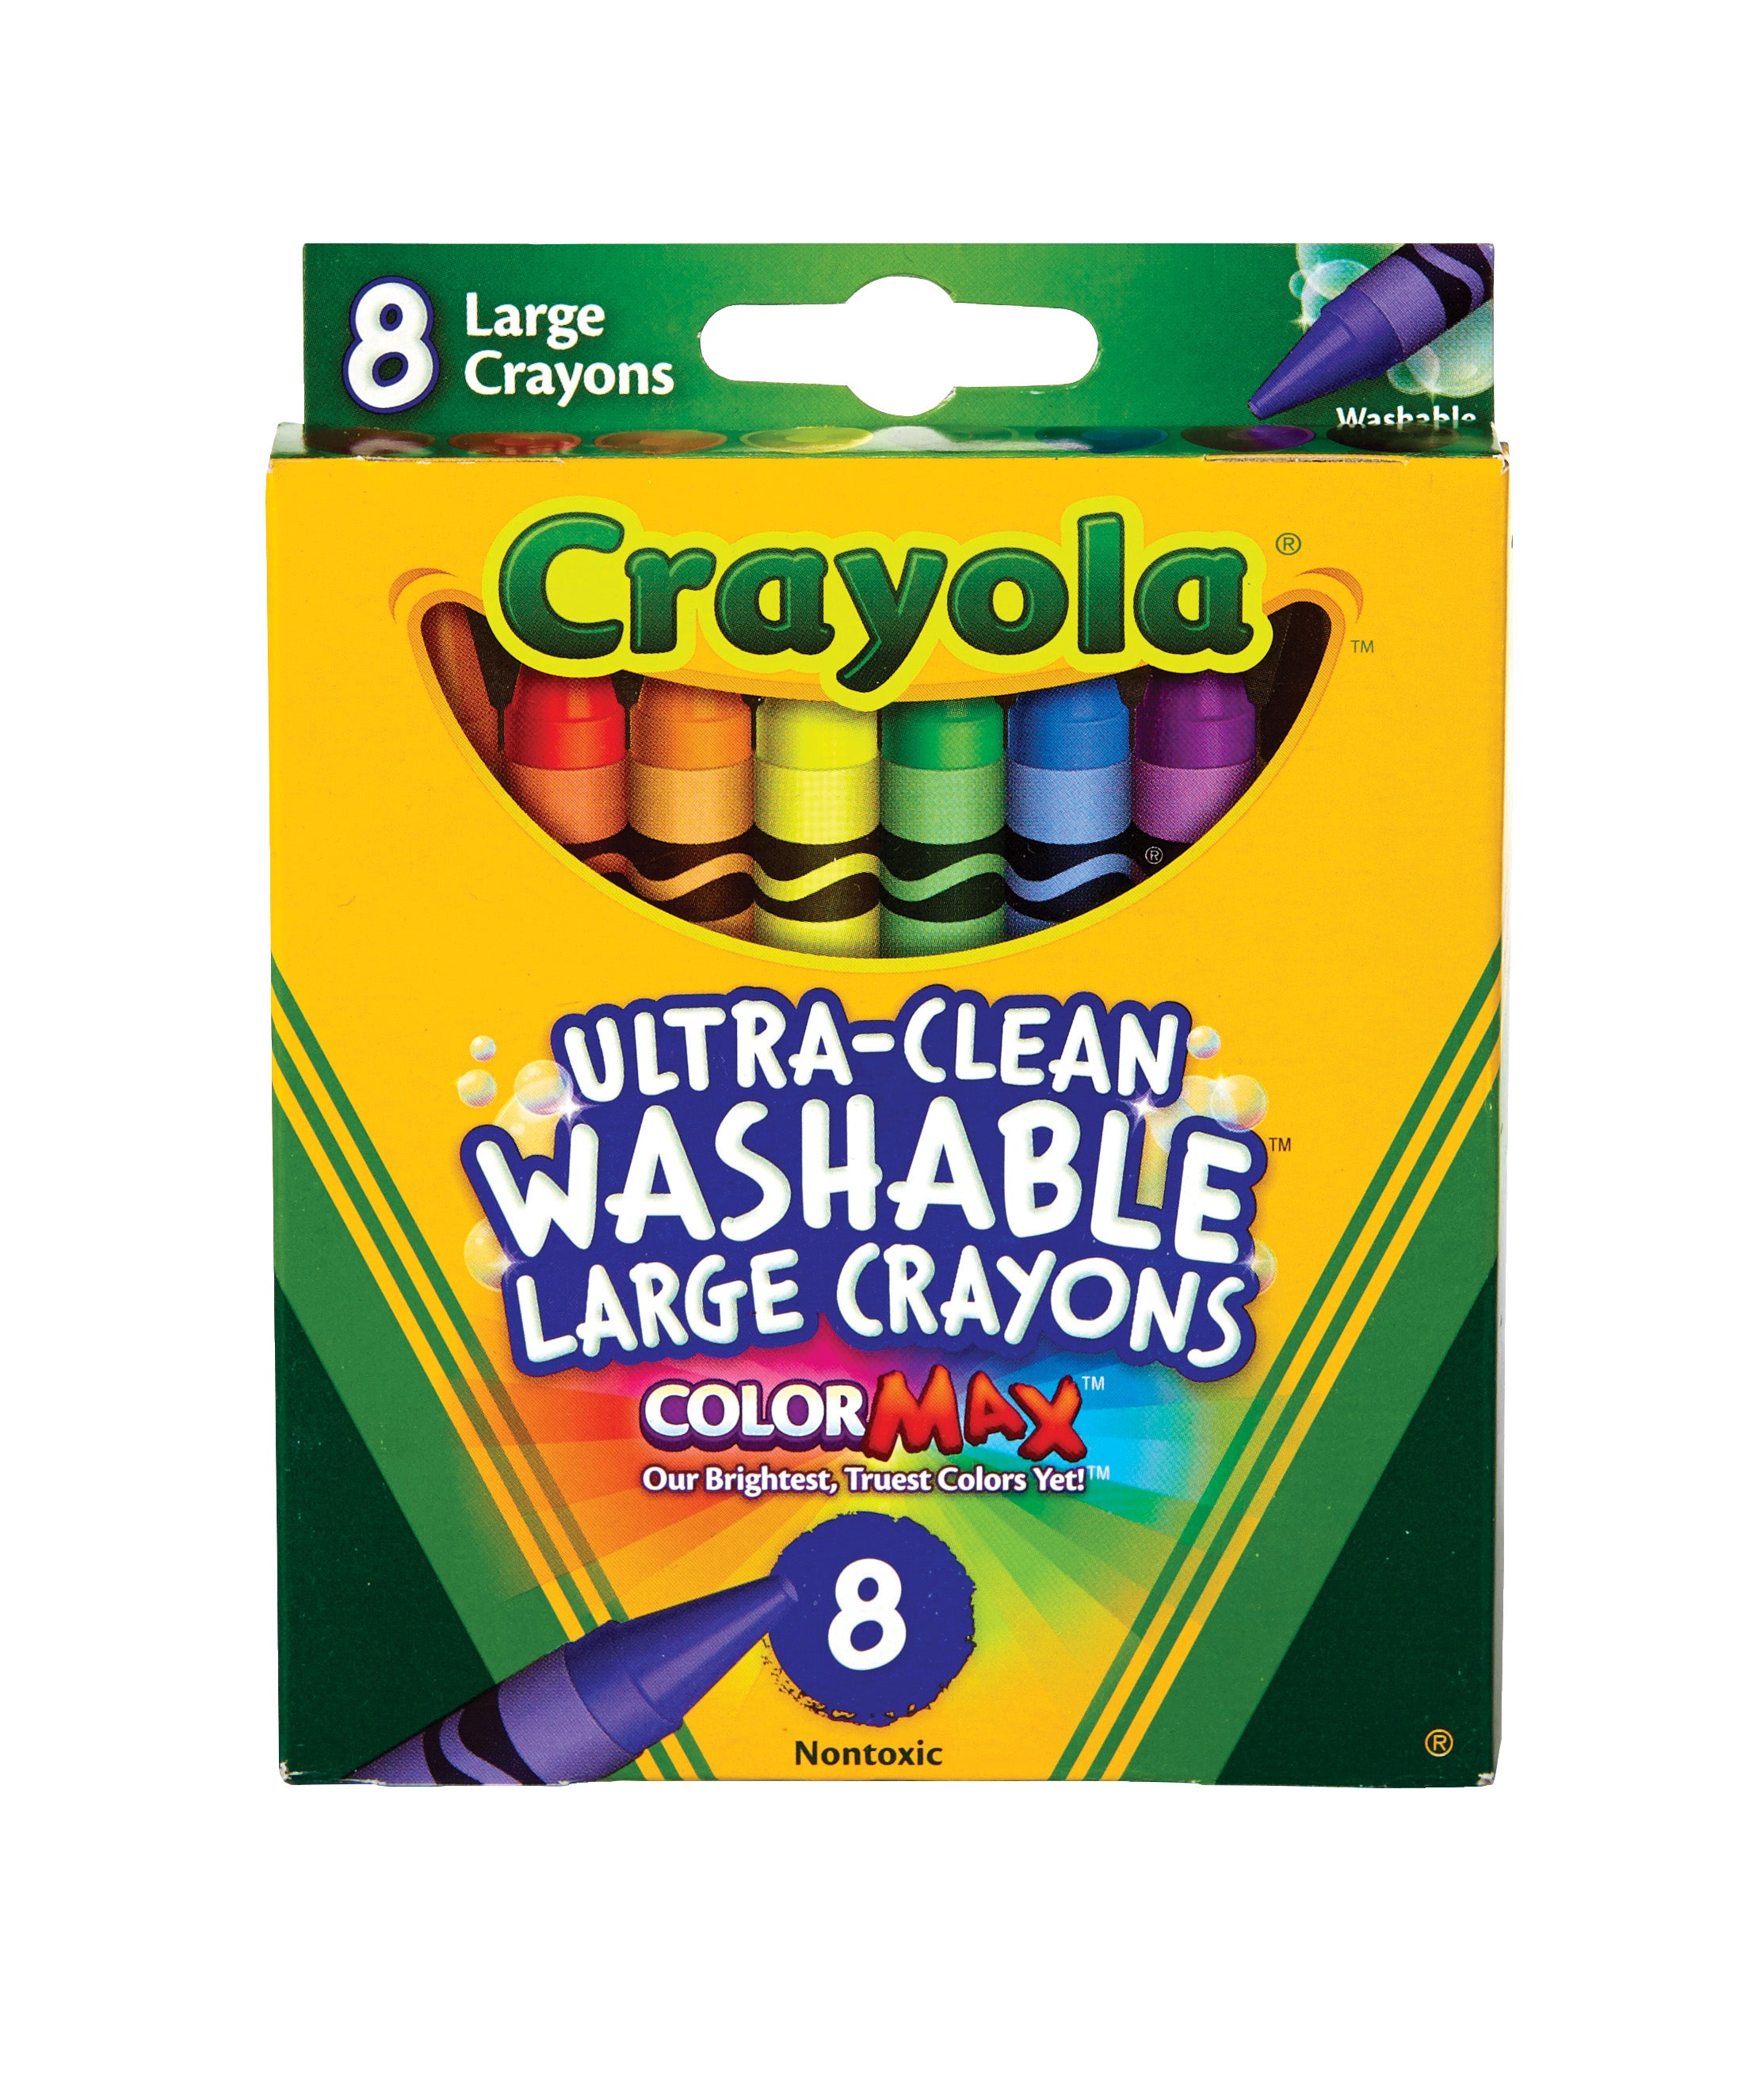 Crayola Ultra-Clean Washable Crayons - 8 Colors (Large)